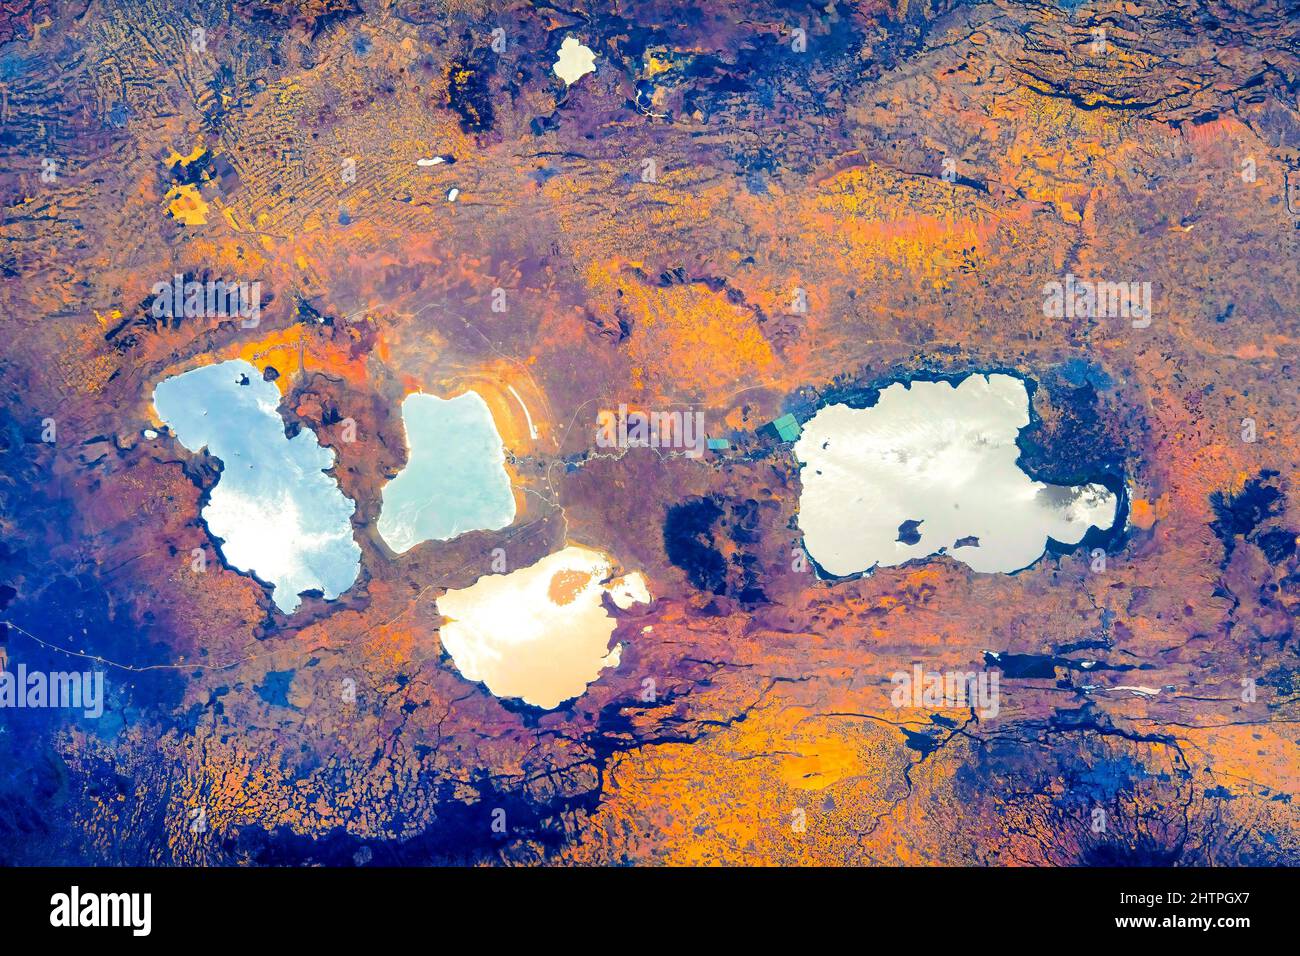 Beauty of our planet Earth's crust. Elements by NASA Stock Photo